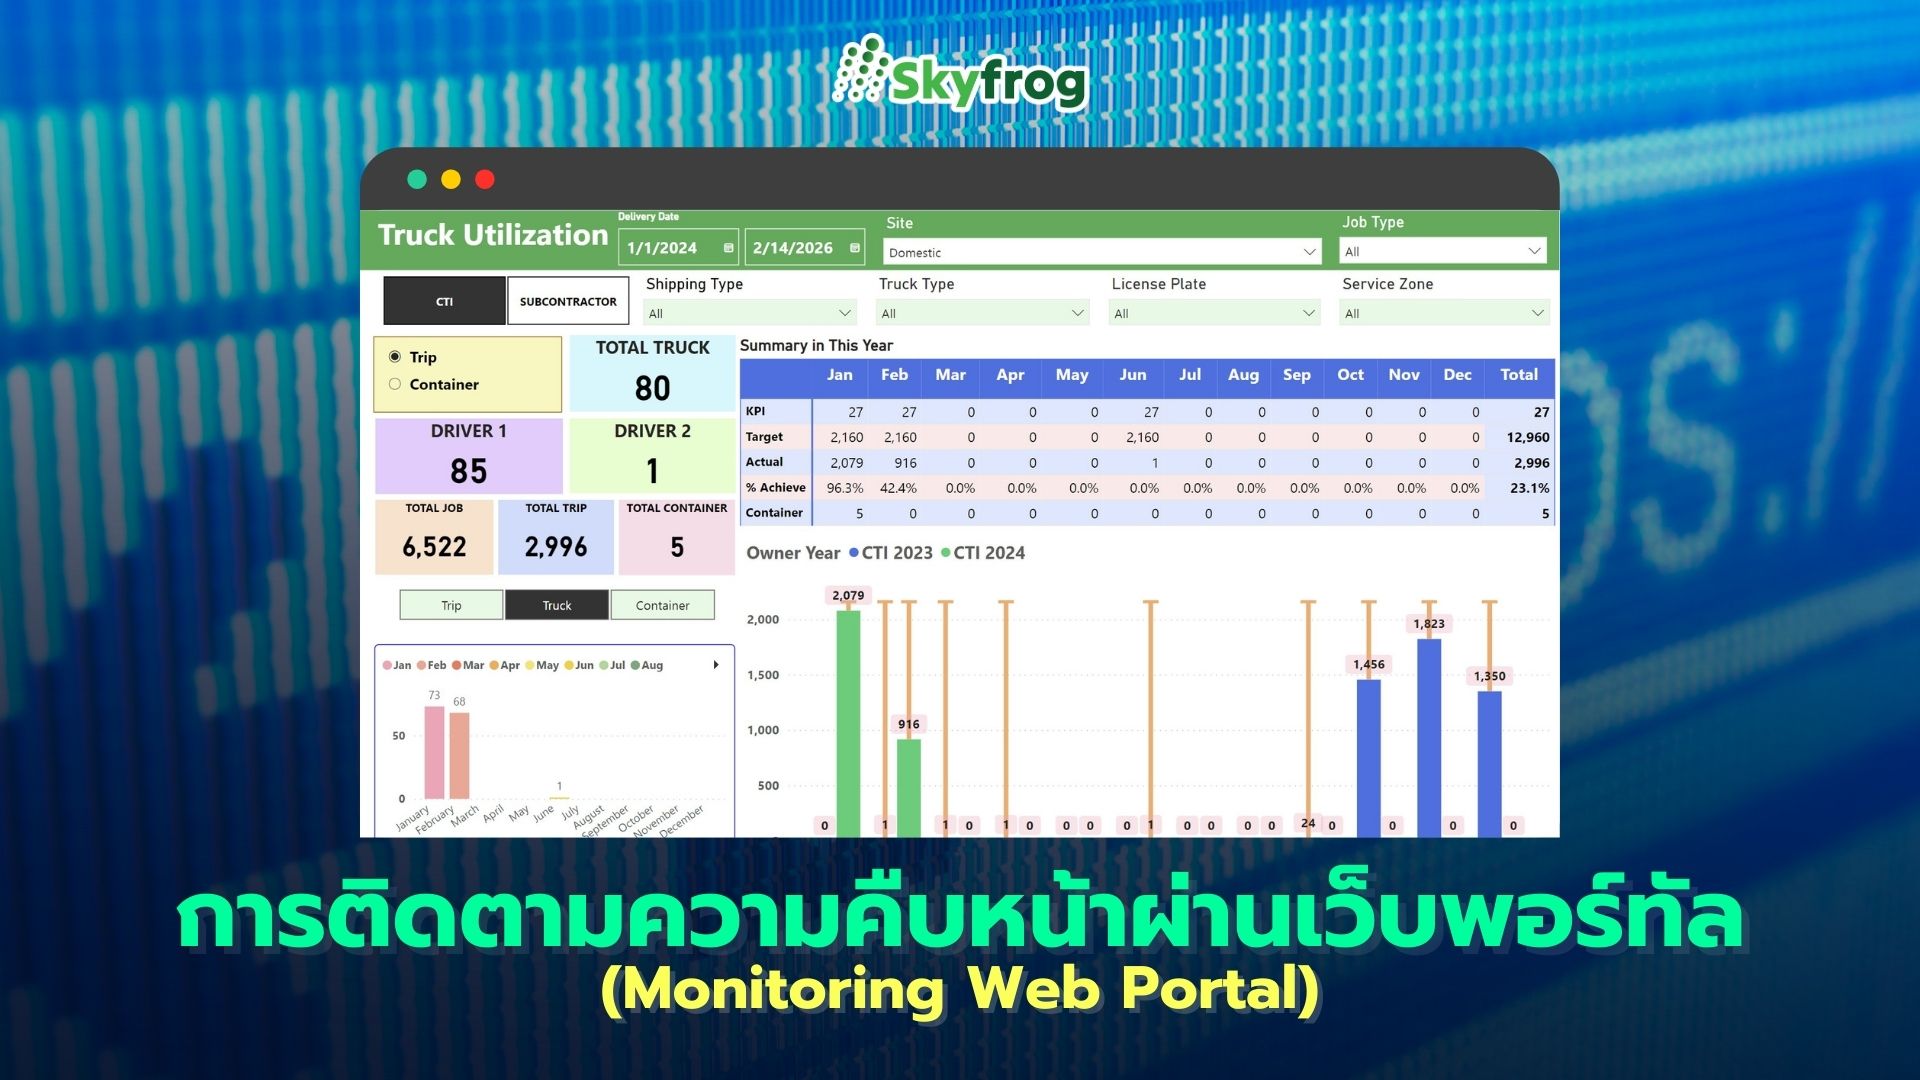 SKYFROG TMS Container Monitoring Web Portal